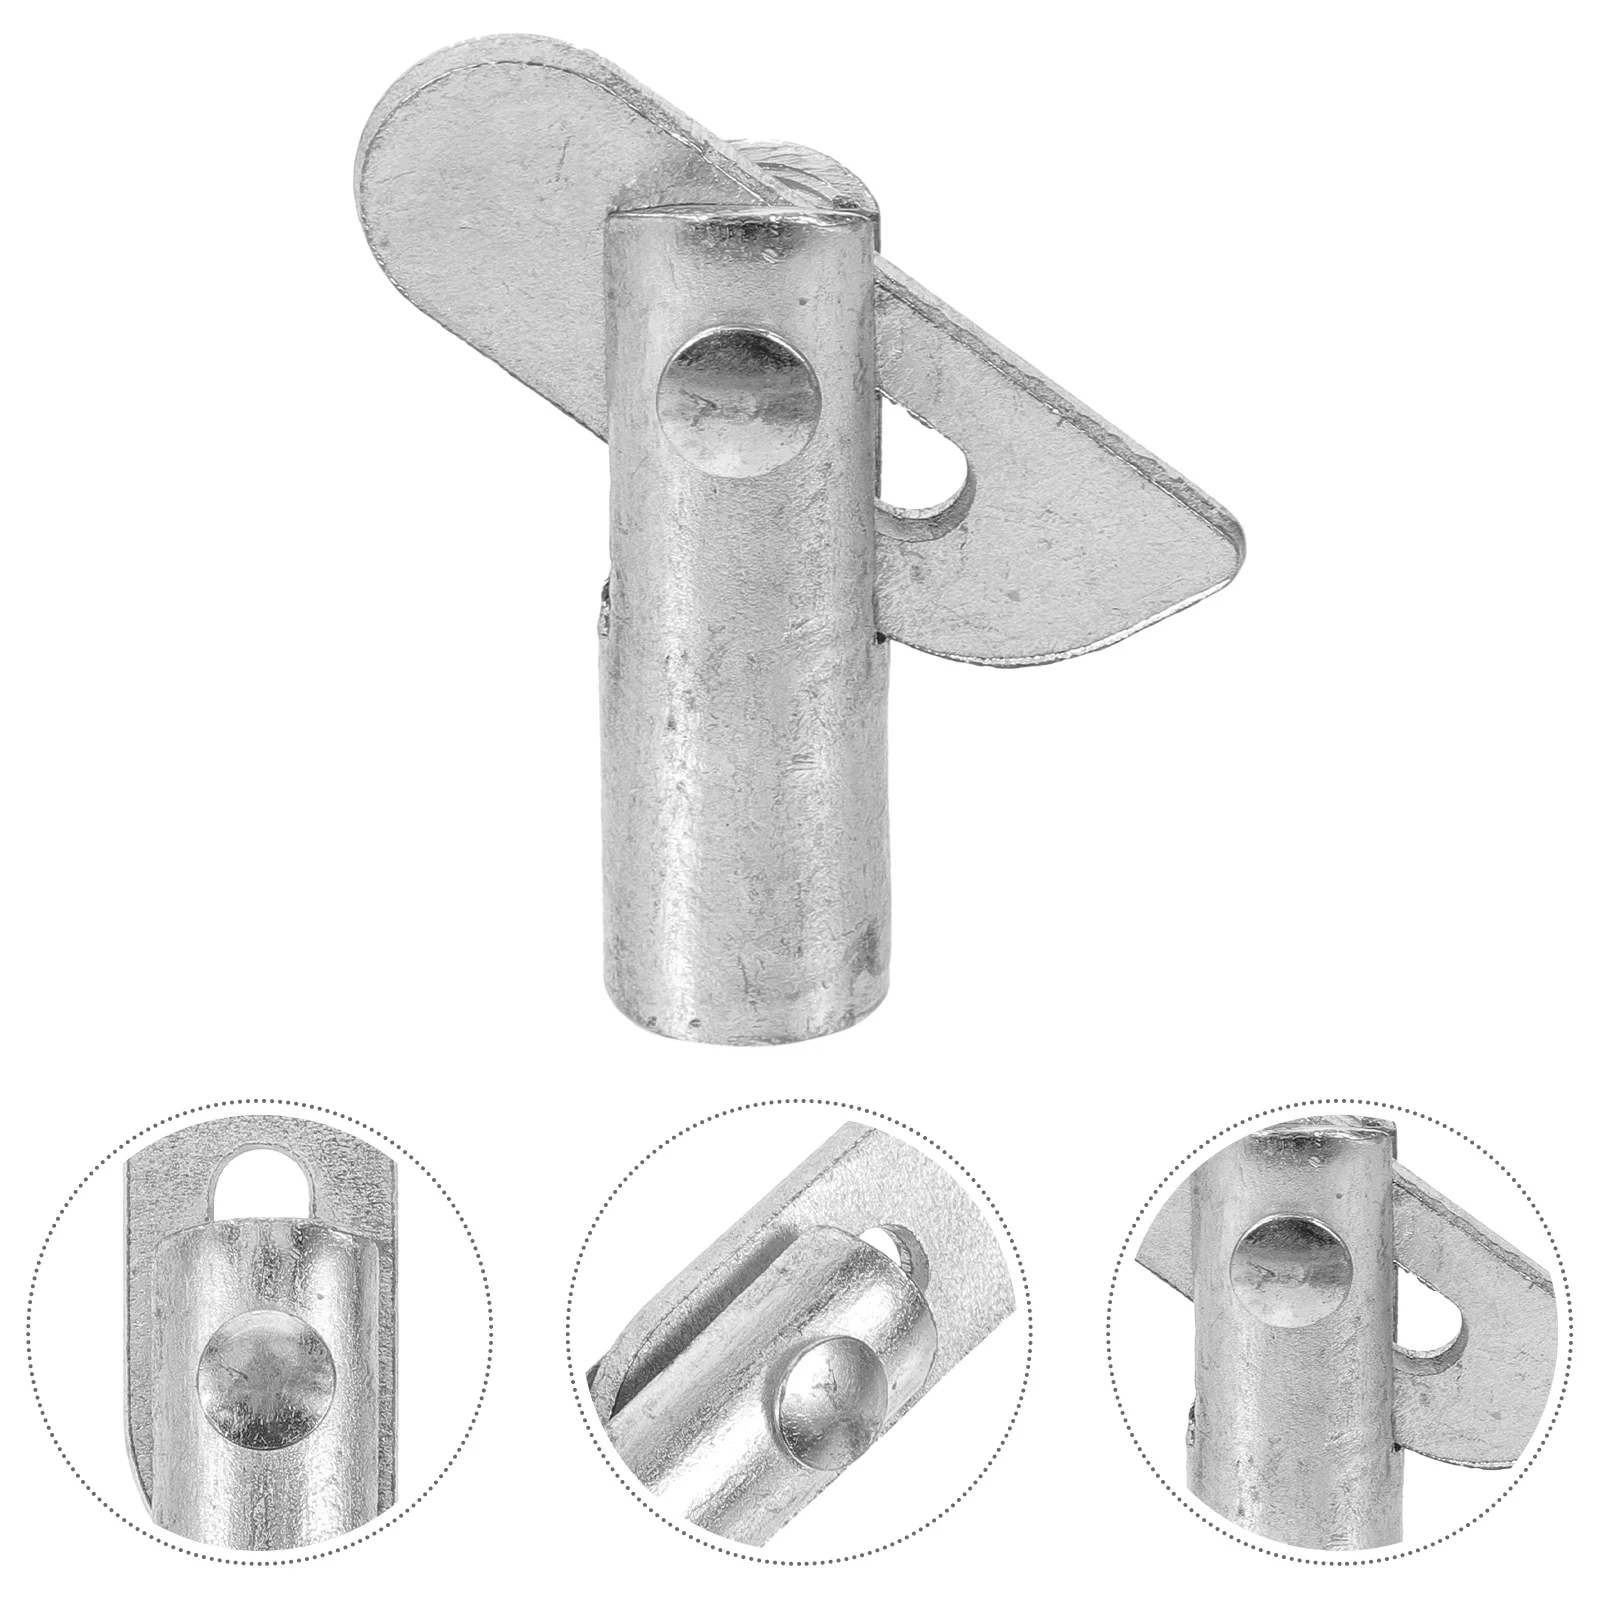 

Small Parts For Scaffolding Small Pull Galvanized Fixed Pin Connecting Rod Insert Pin Locking Cotter Parts Replacement